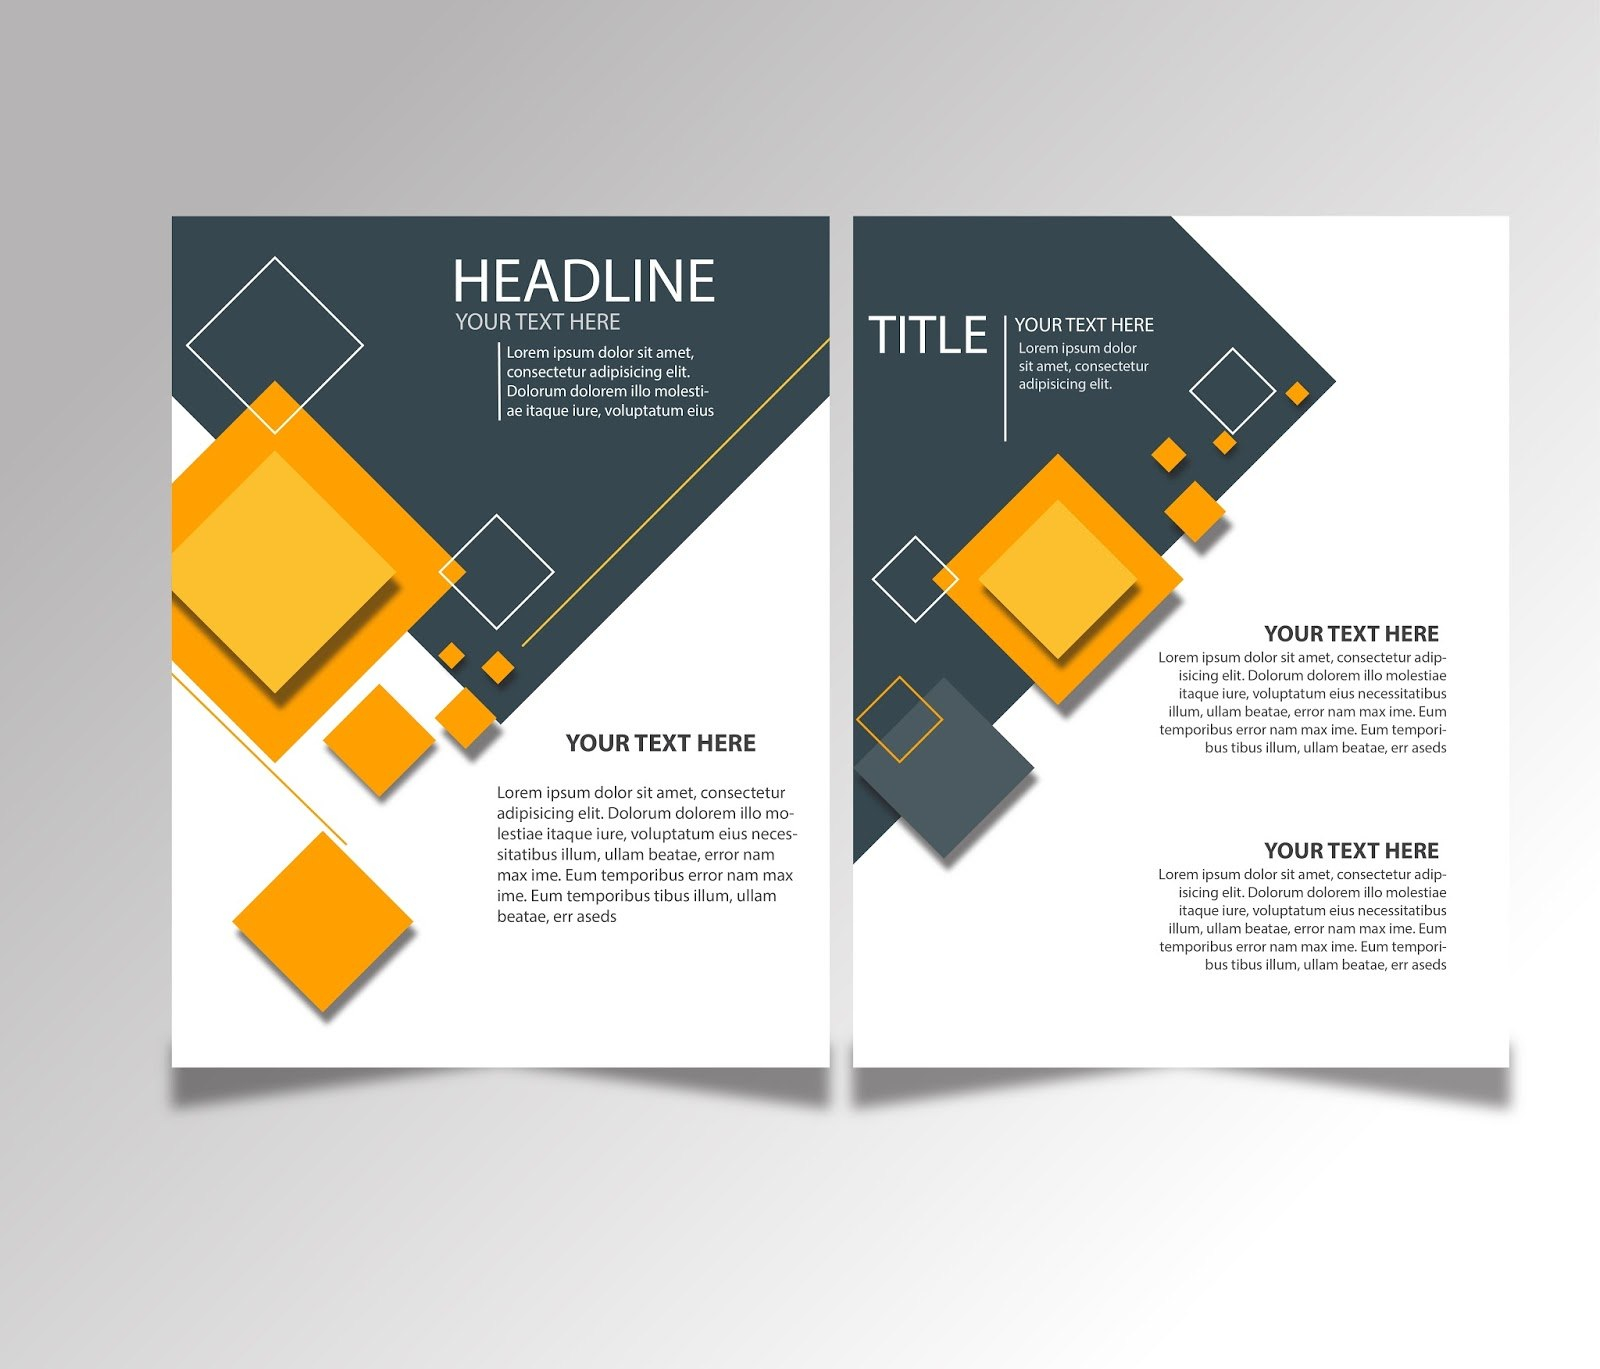 Free Download Brochure Design Templates Ai Files  Ideosprocess intended for Adobe Illustrator Brochure Templates Free Download